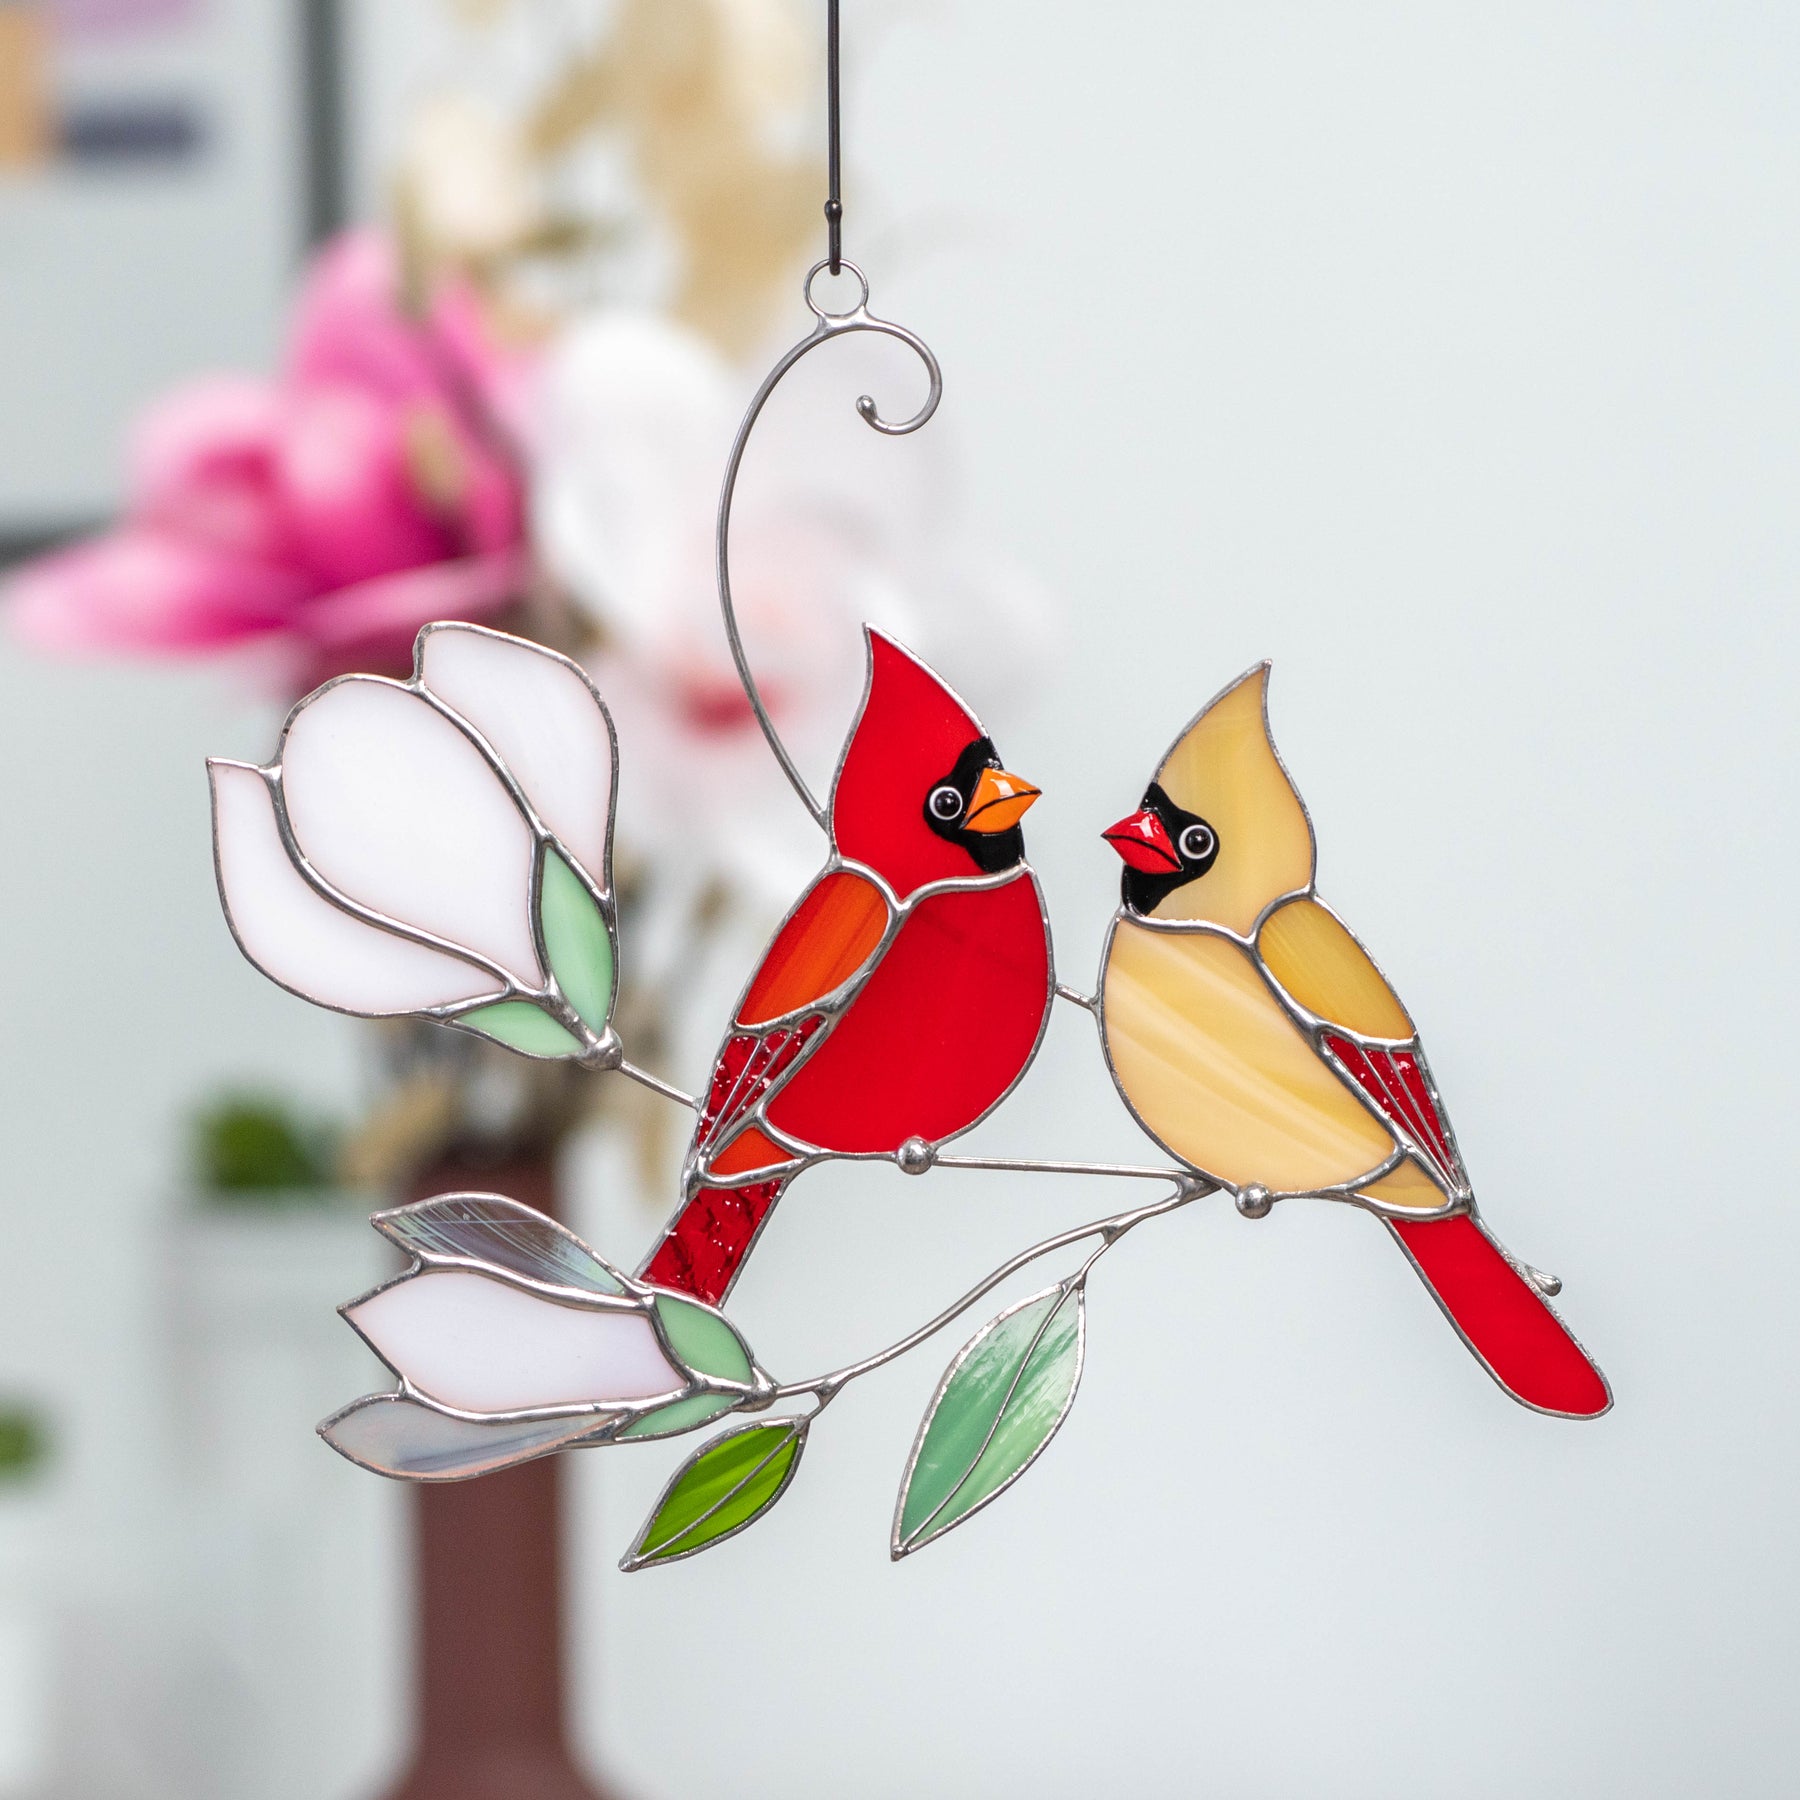 Stained Glass Gifts  Cardinal Gifts – Gifts St.Louis